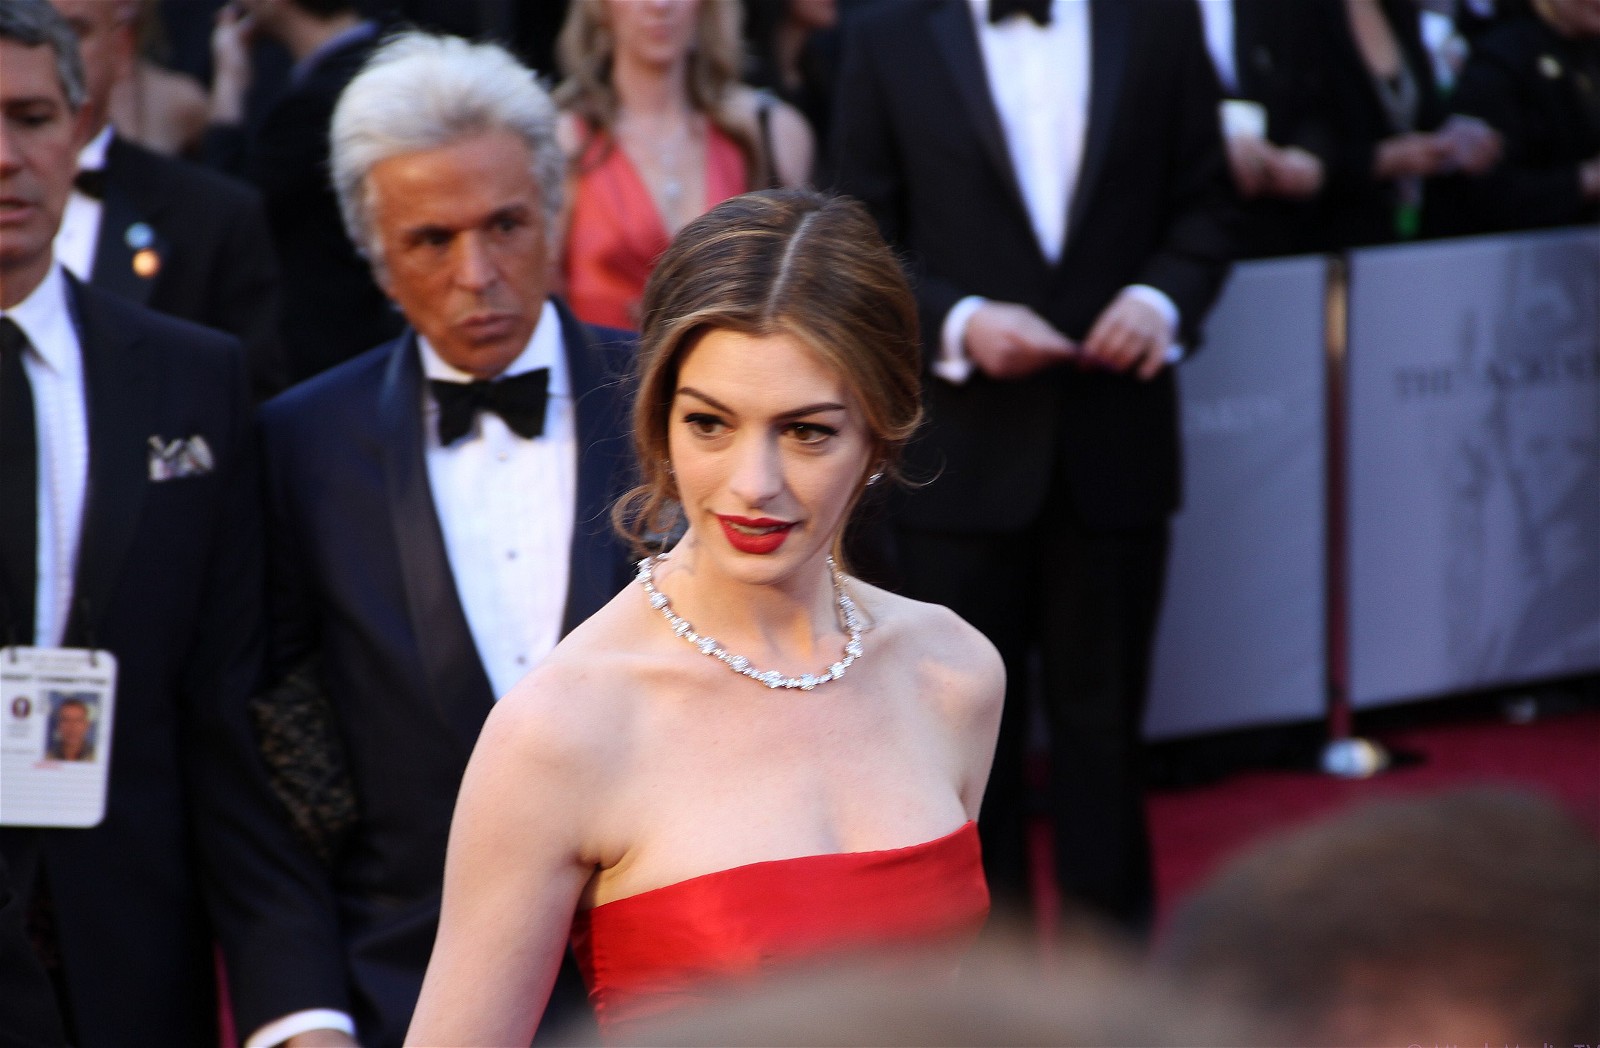 Anne Hathaway smiling on 83rd Academy Awards red carpet